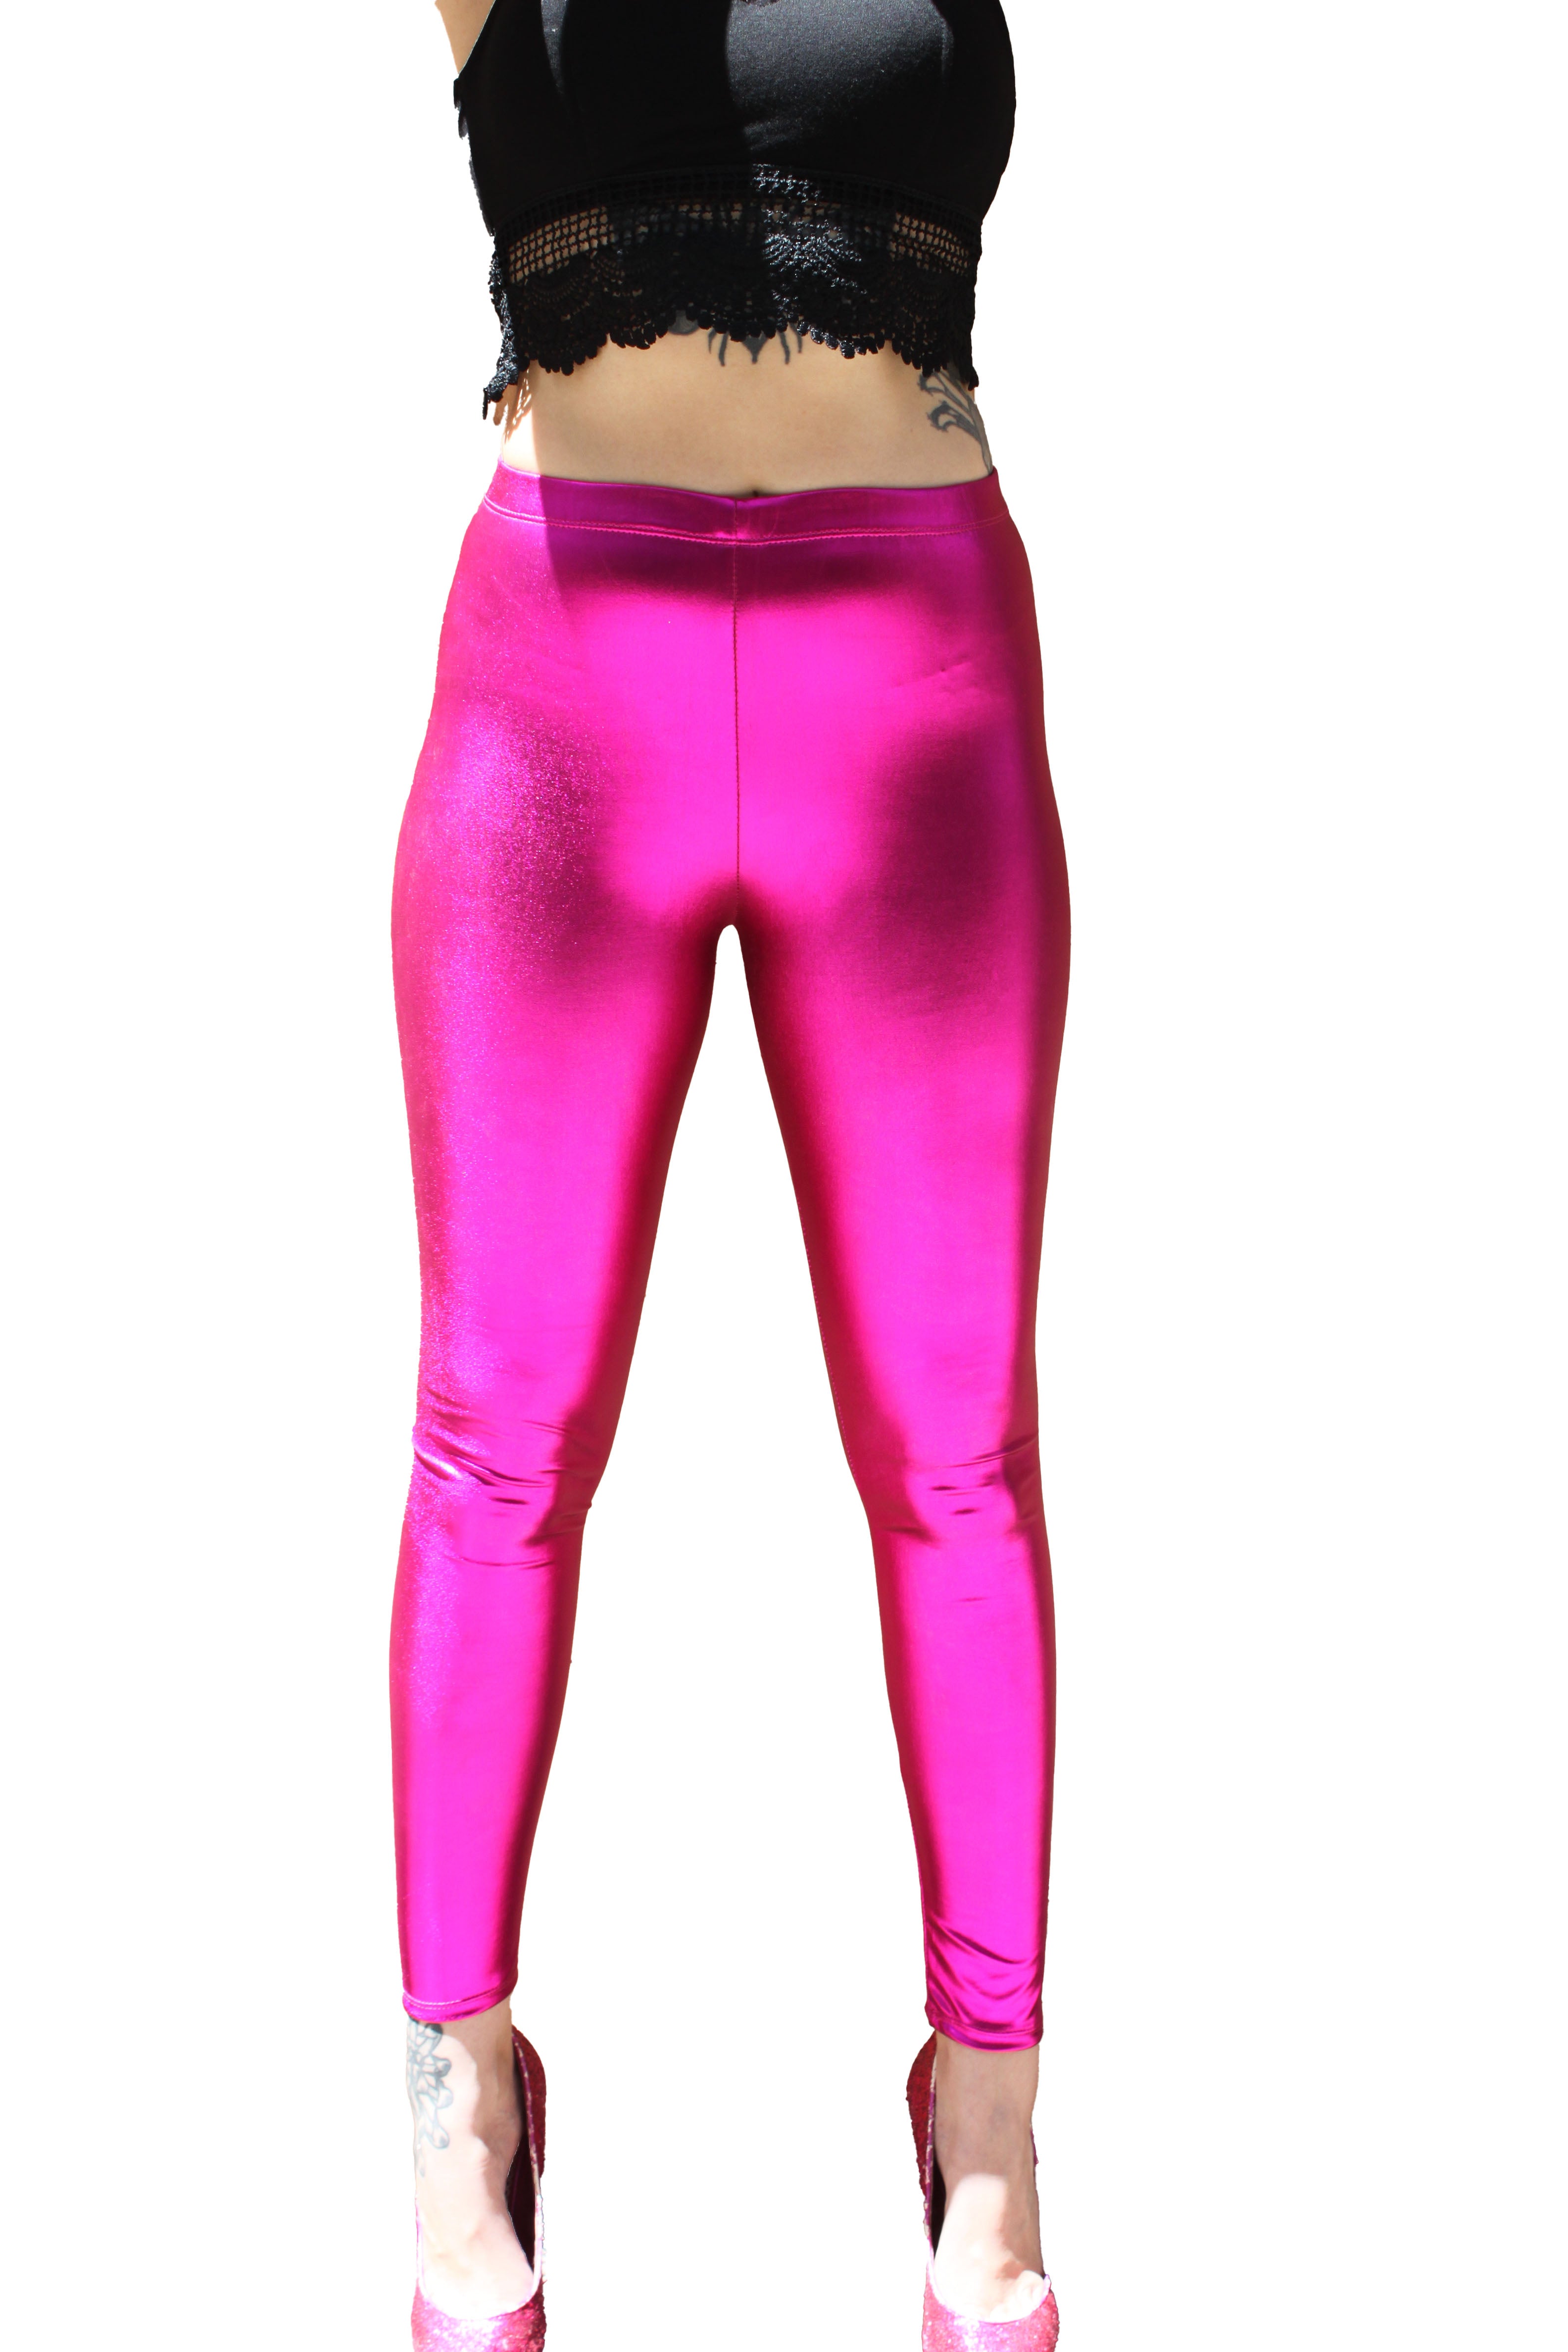 Shiny Glitters on Pink and Purple Metallic Background Leggings by Tees2go |  Society6